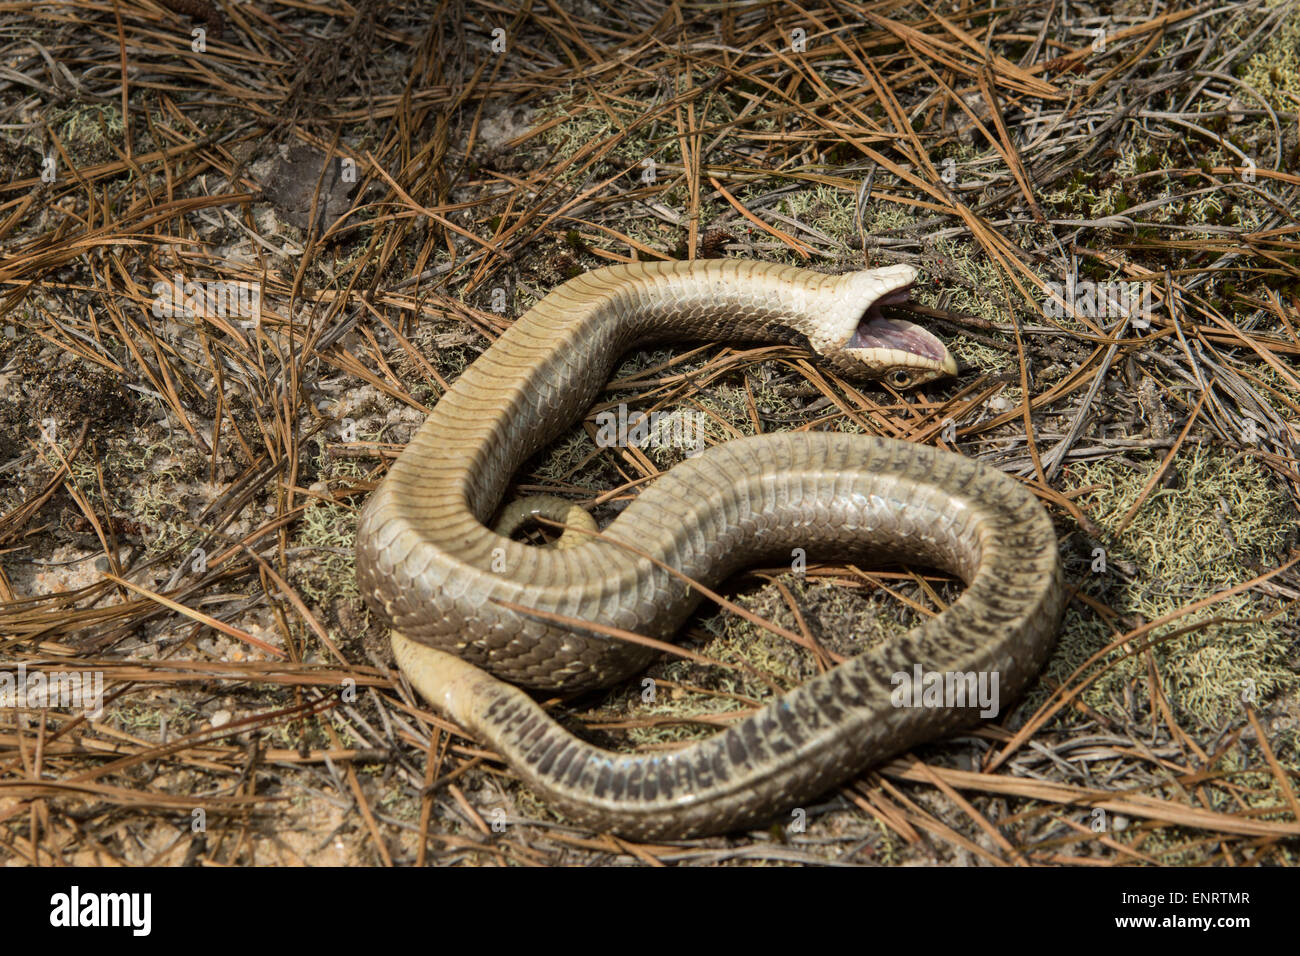 Eastern hognose snake plays dead after dramatic performance